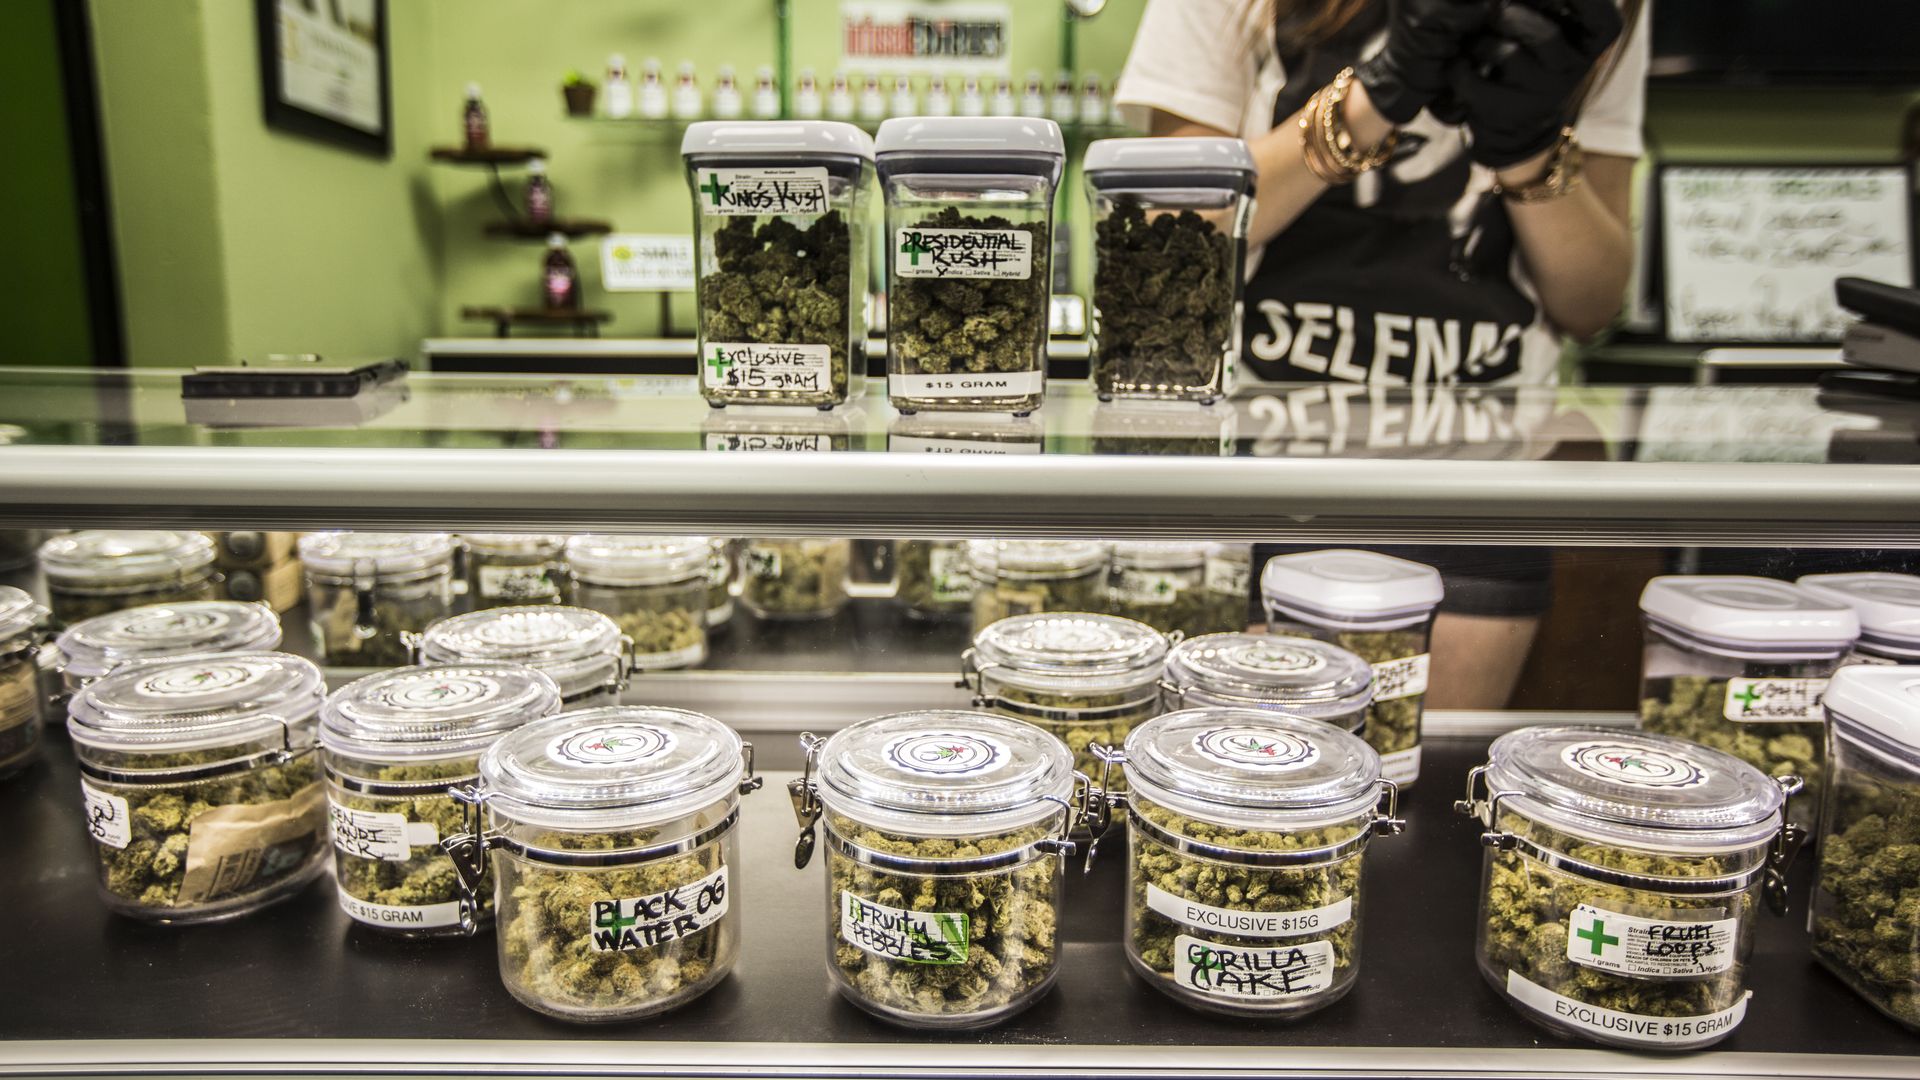 Containers of recreational marijuana for sale at a dispensary in California